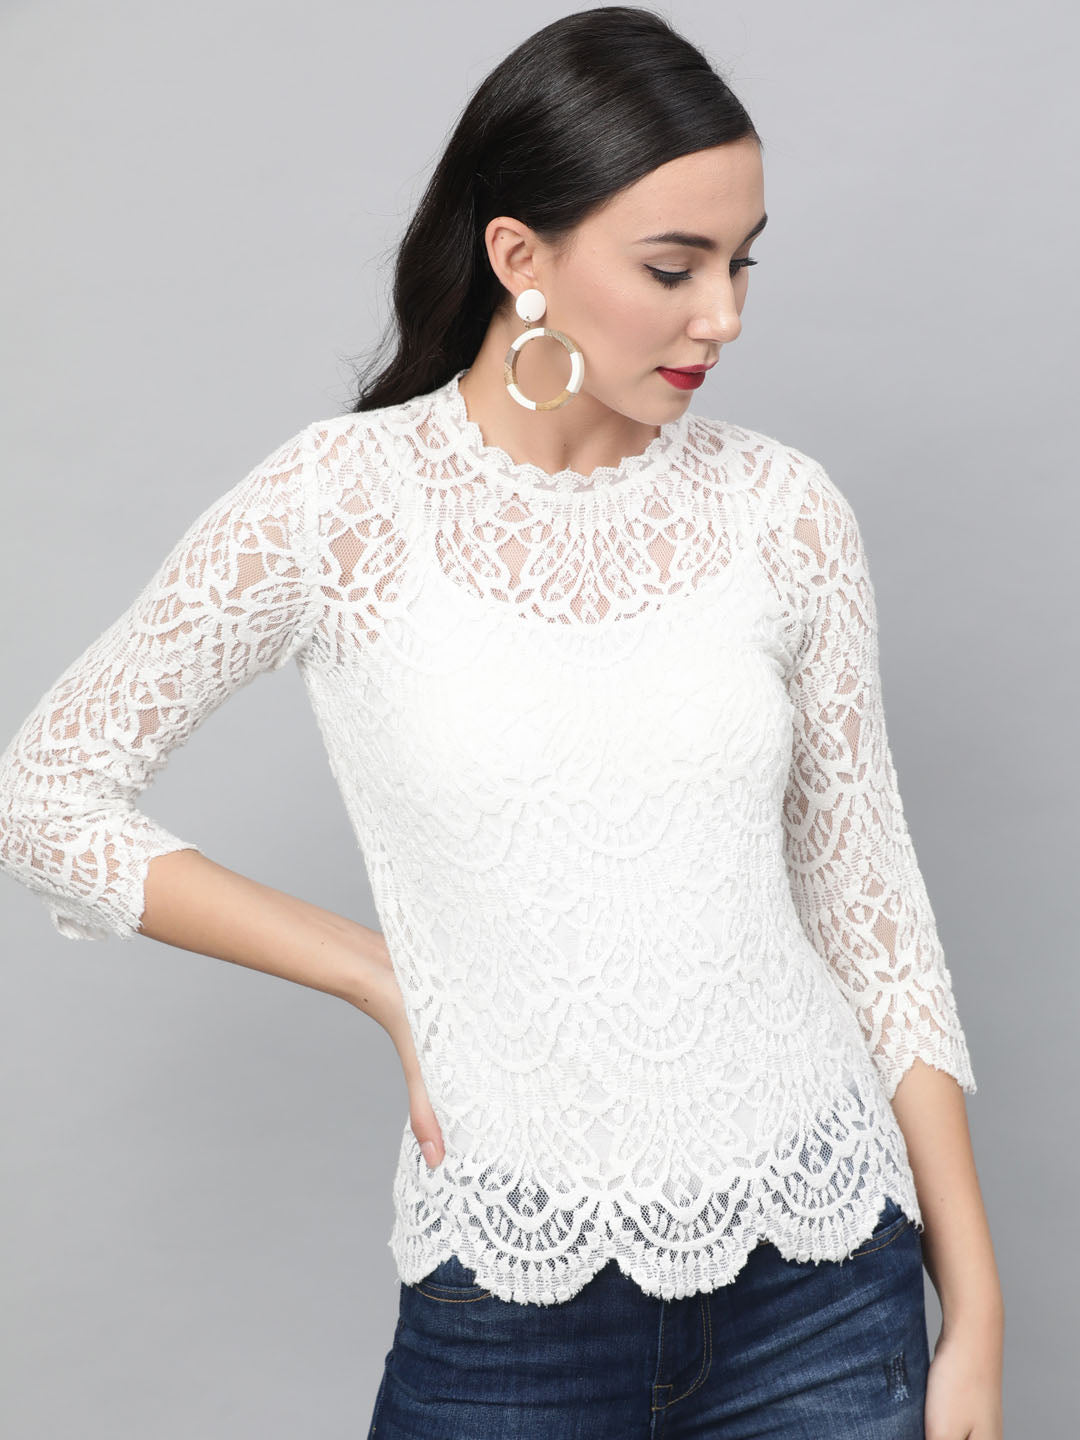  White Lace Top